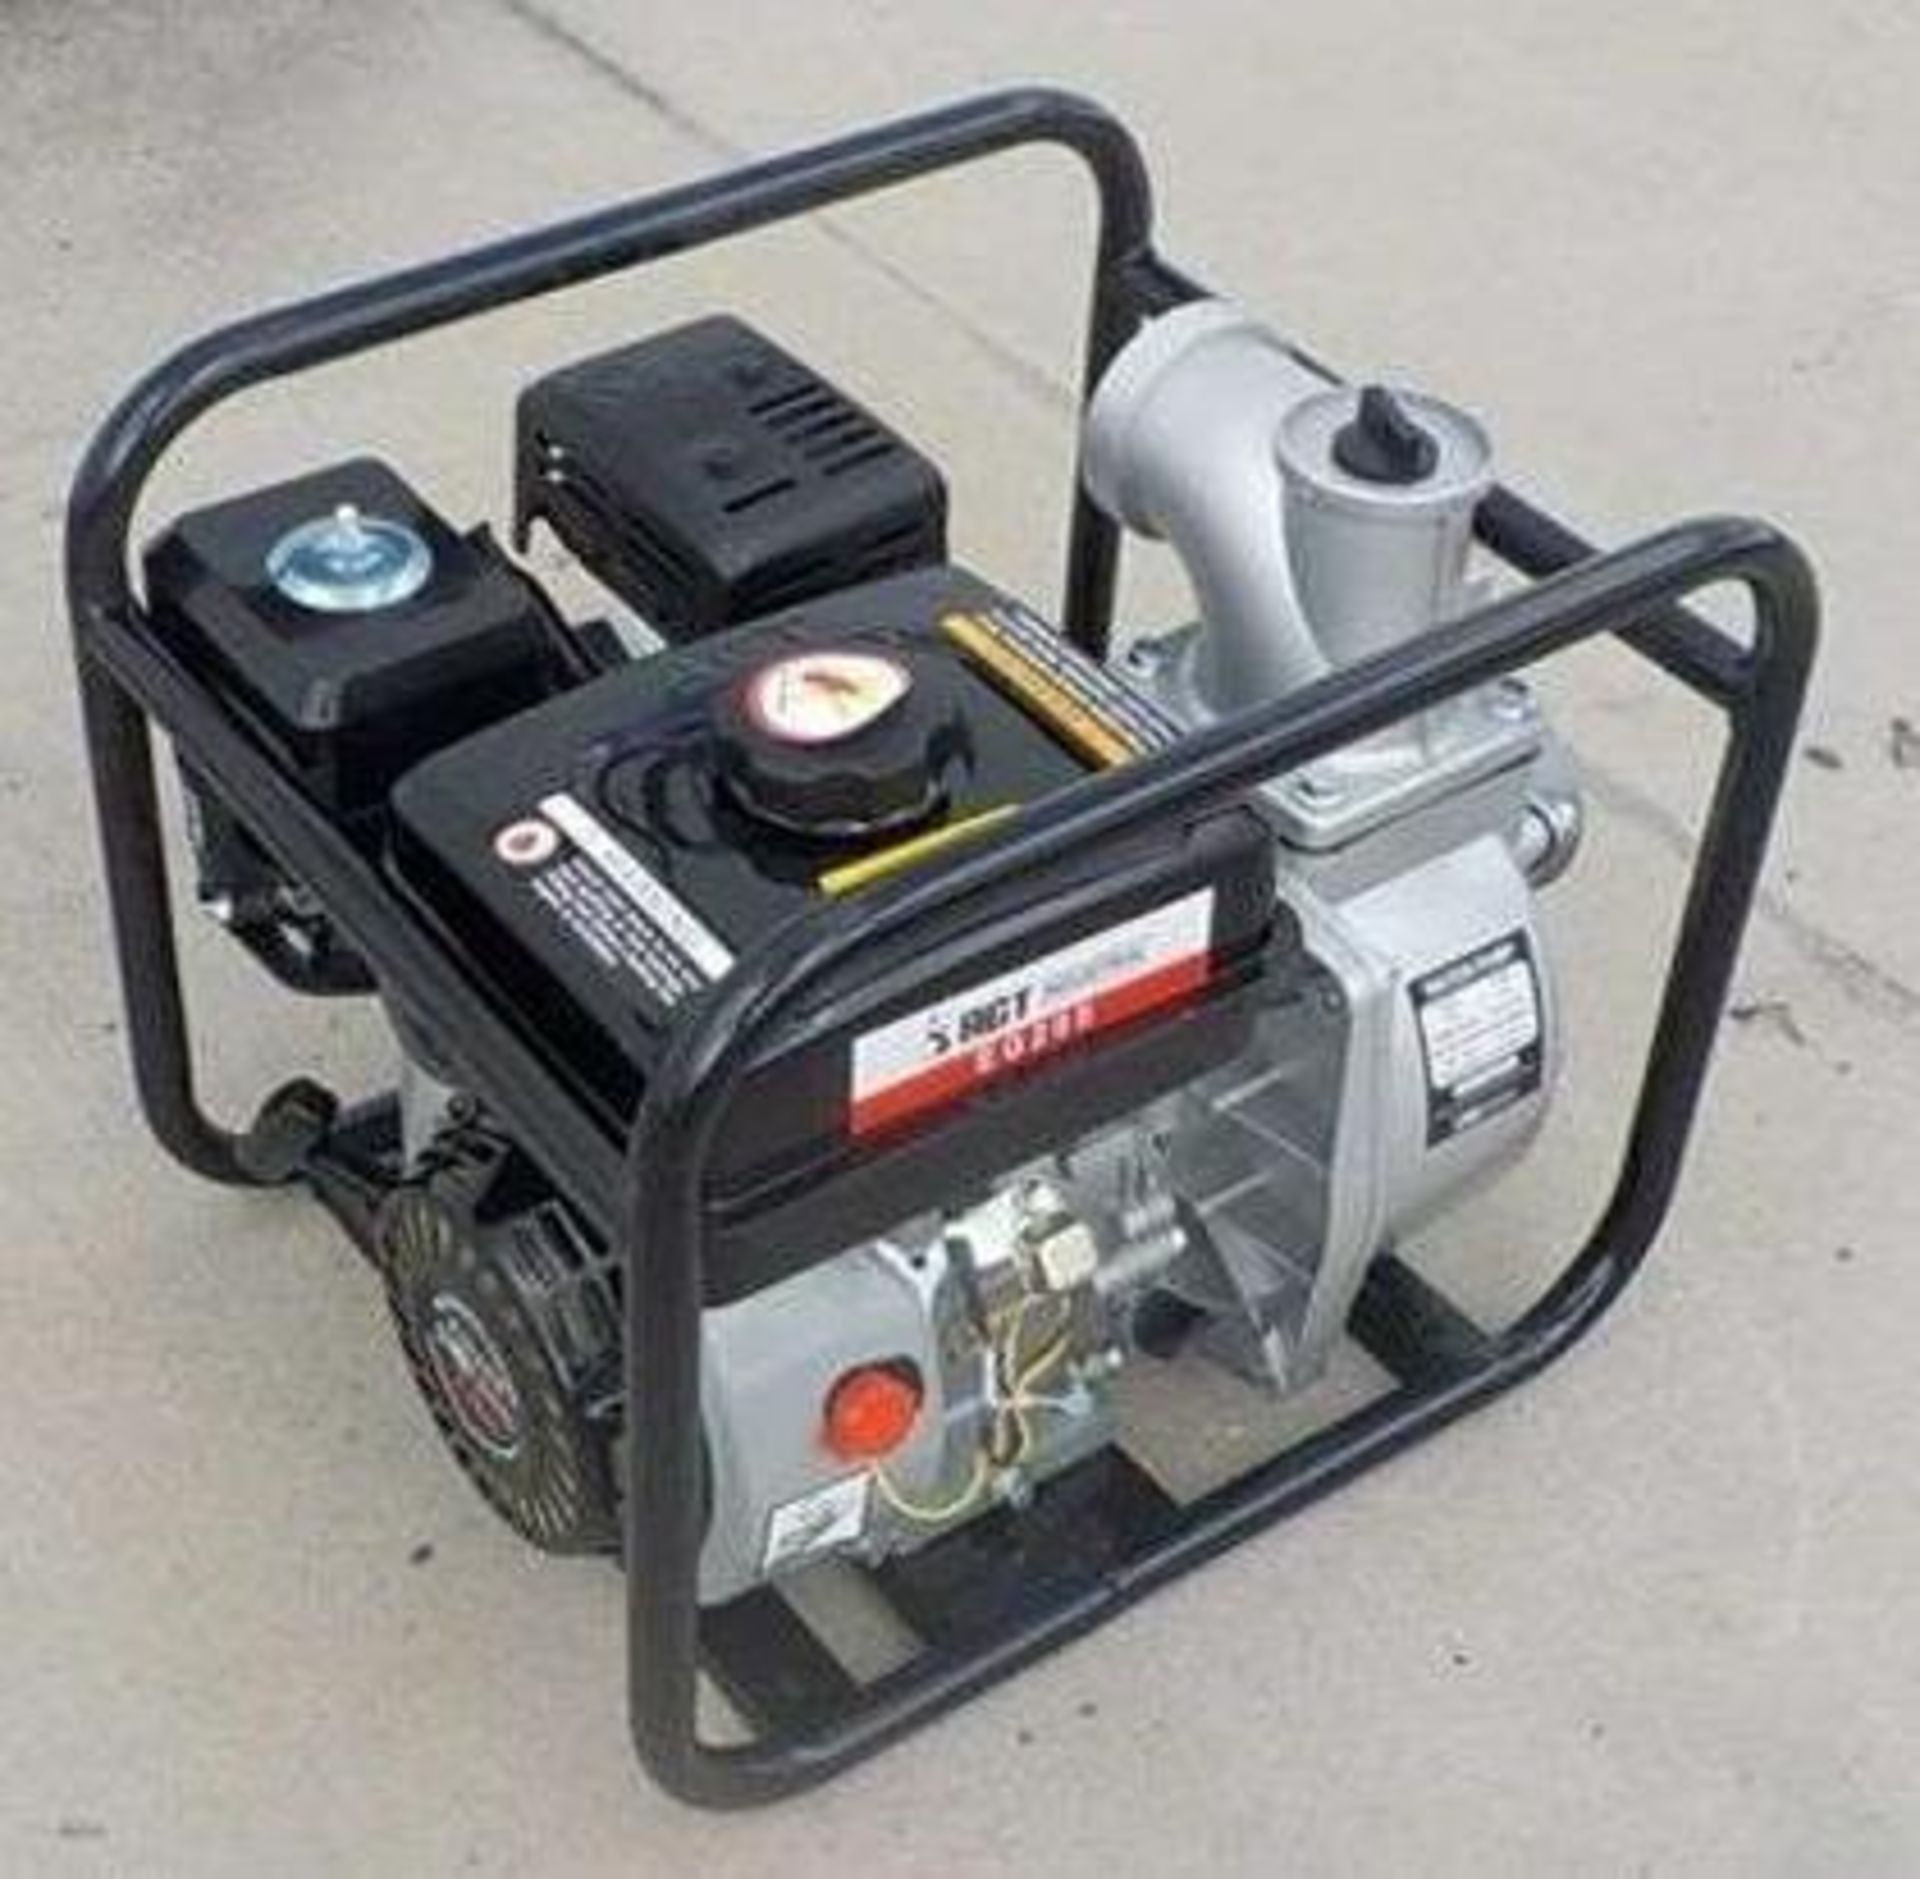 AGT WP-80 PORTABLE 3" WATER PUMP BRAND/MODEL: AGT WP-80 INFORMATION: NEW, 7.5 HP GAS ENGINE RECOIL